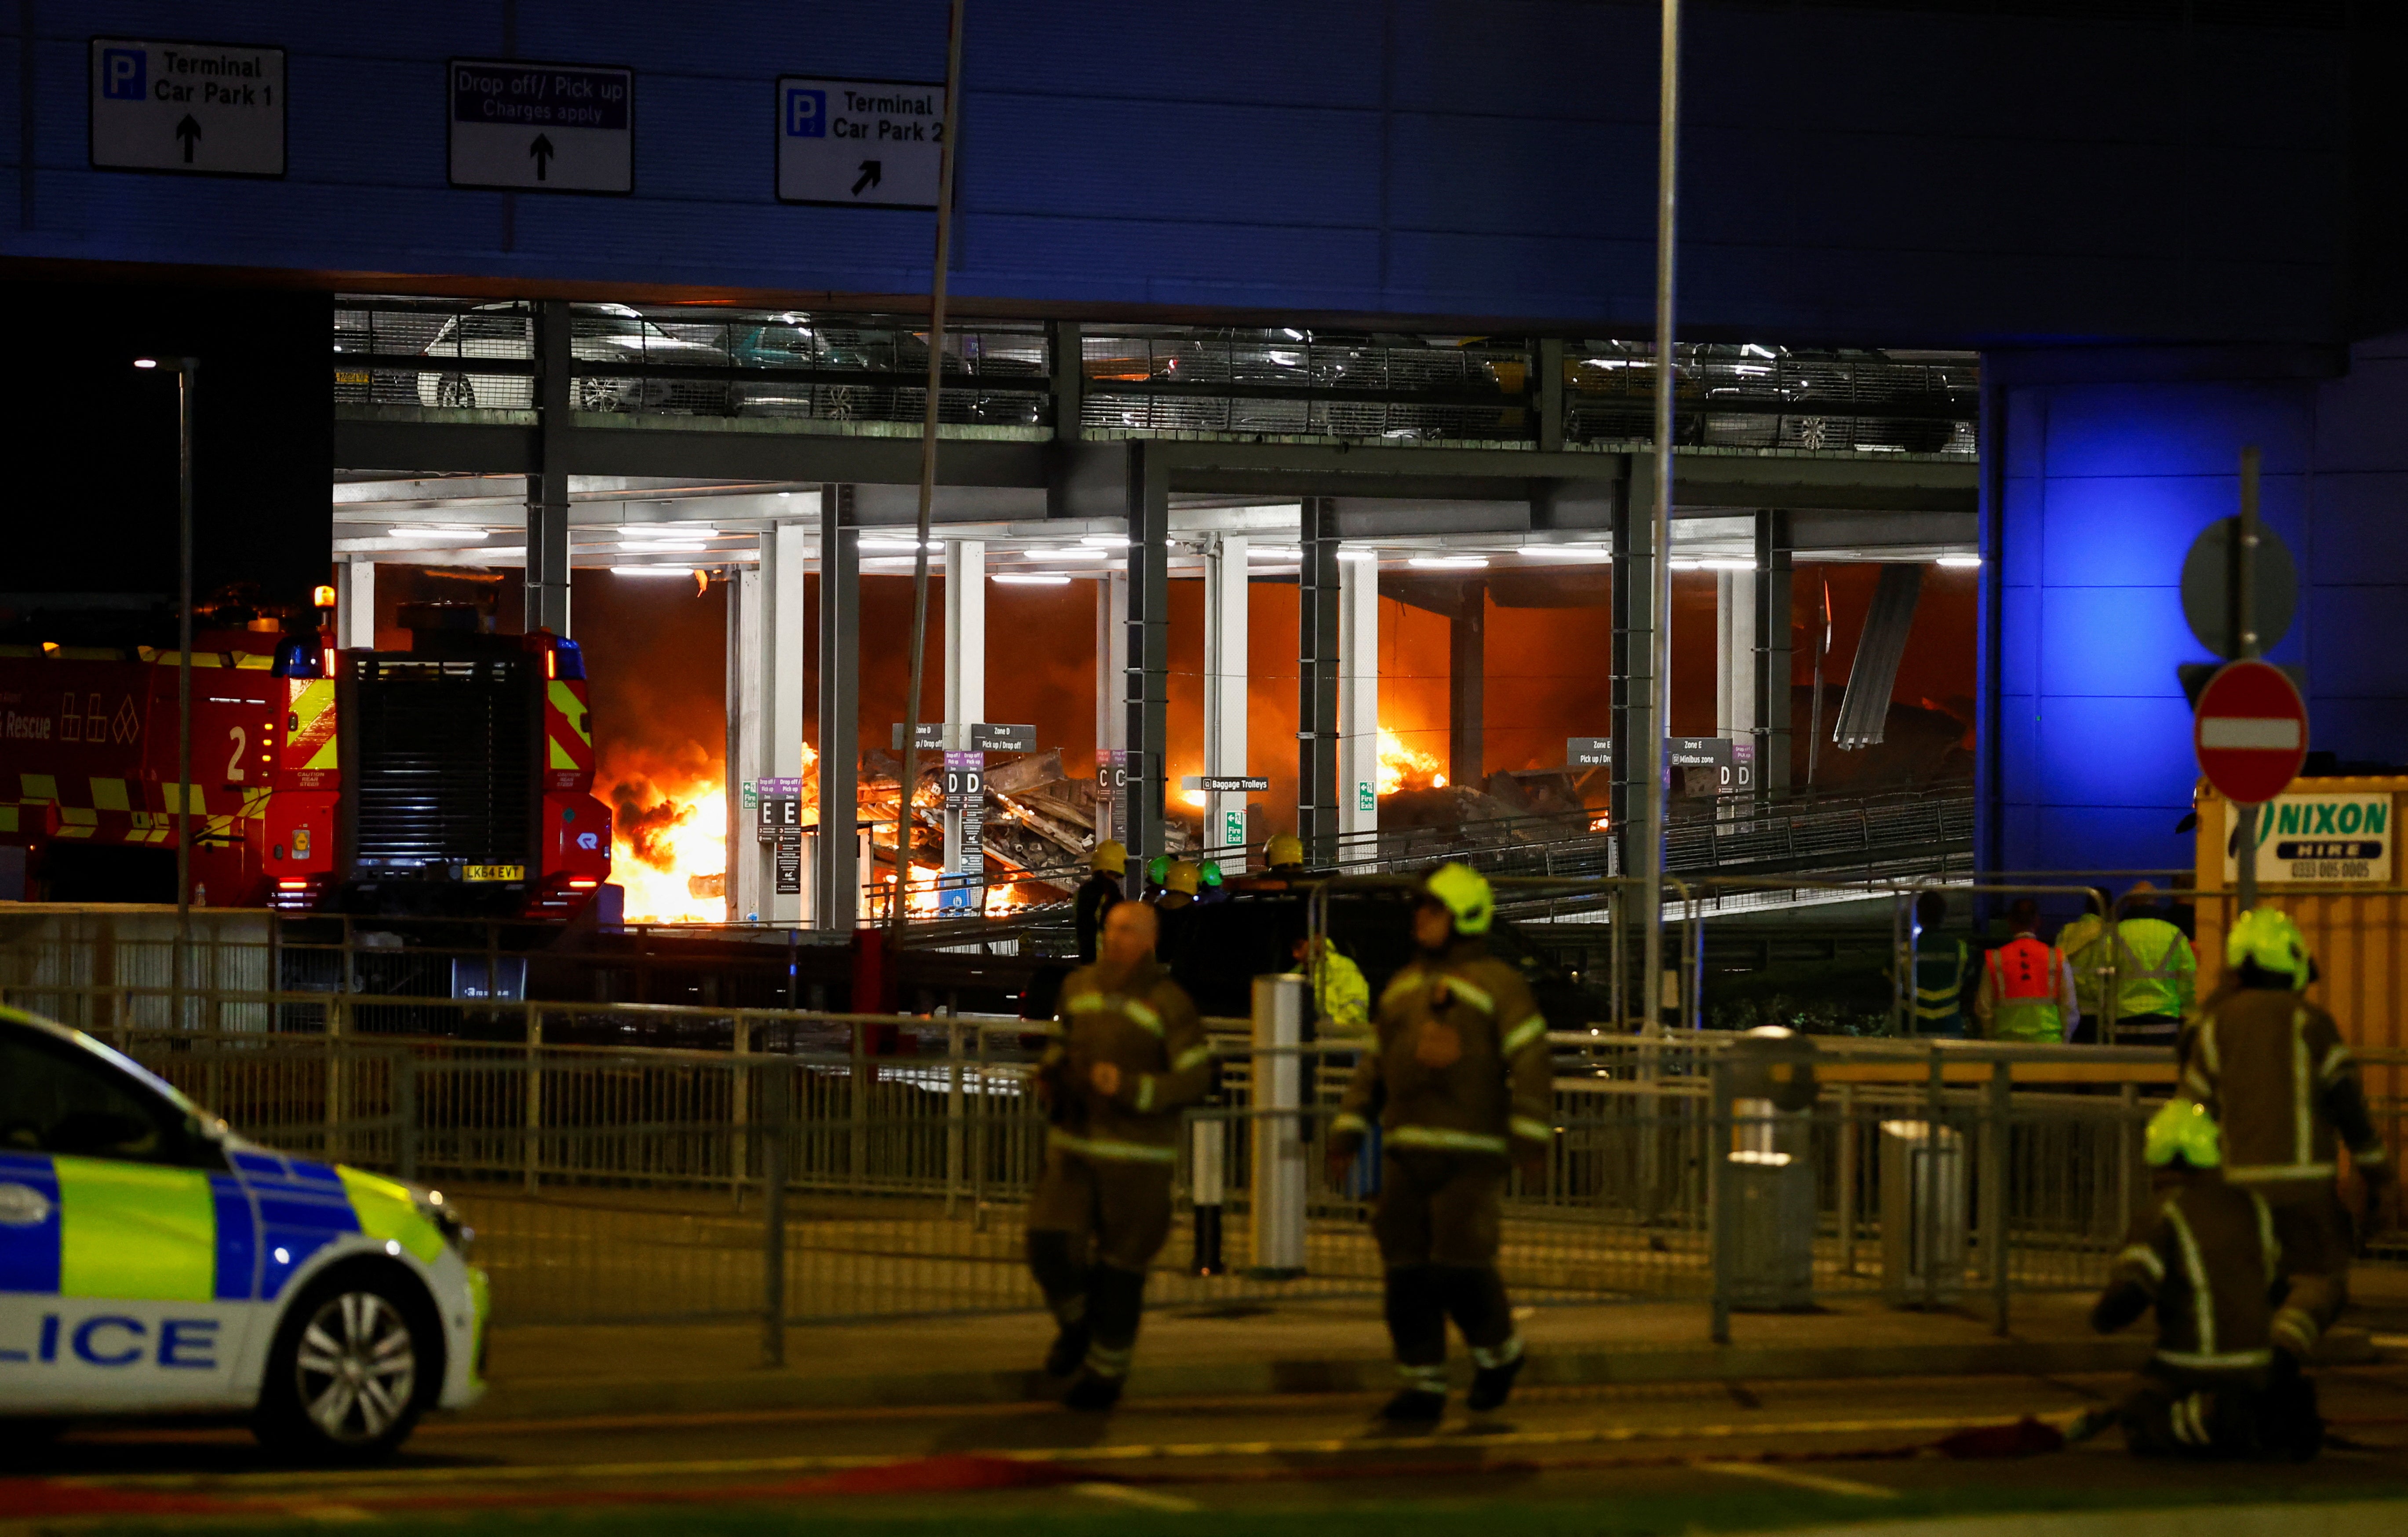 Flames are seen as emergency services respond to the fire in Terminal Car Park 2 at London Luton airport in Luton